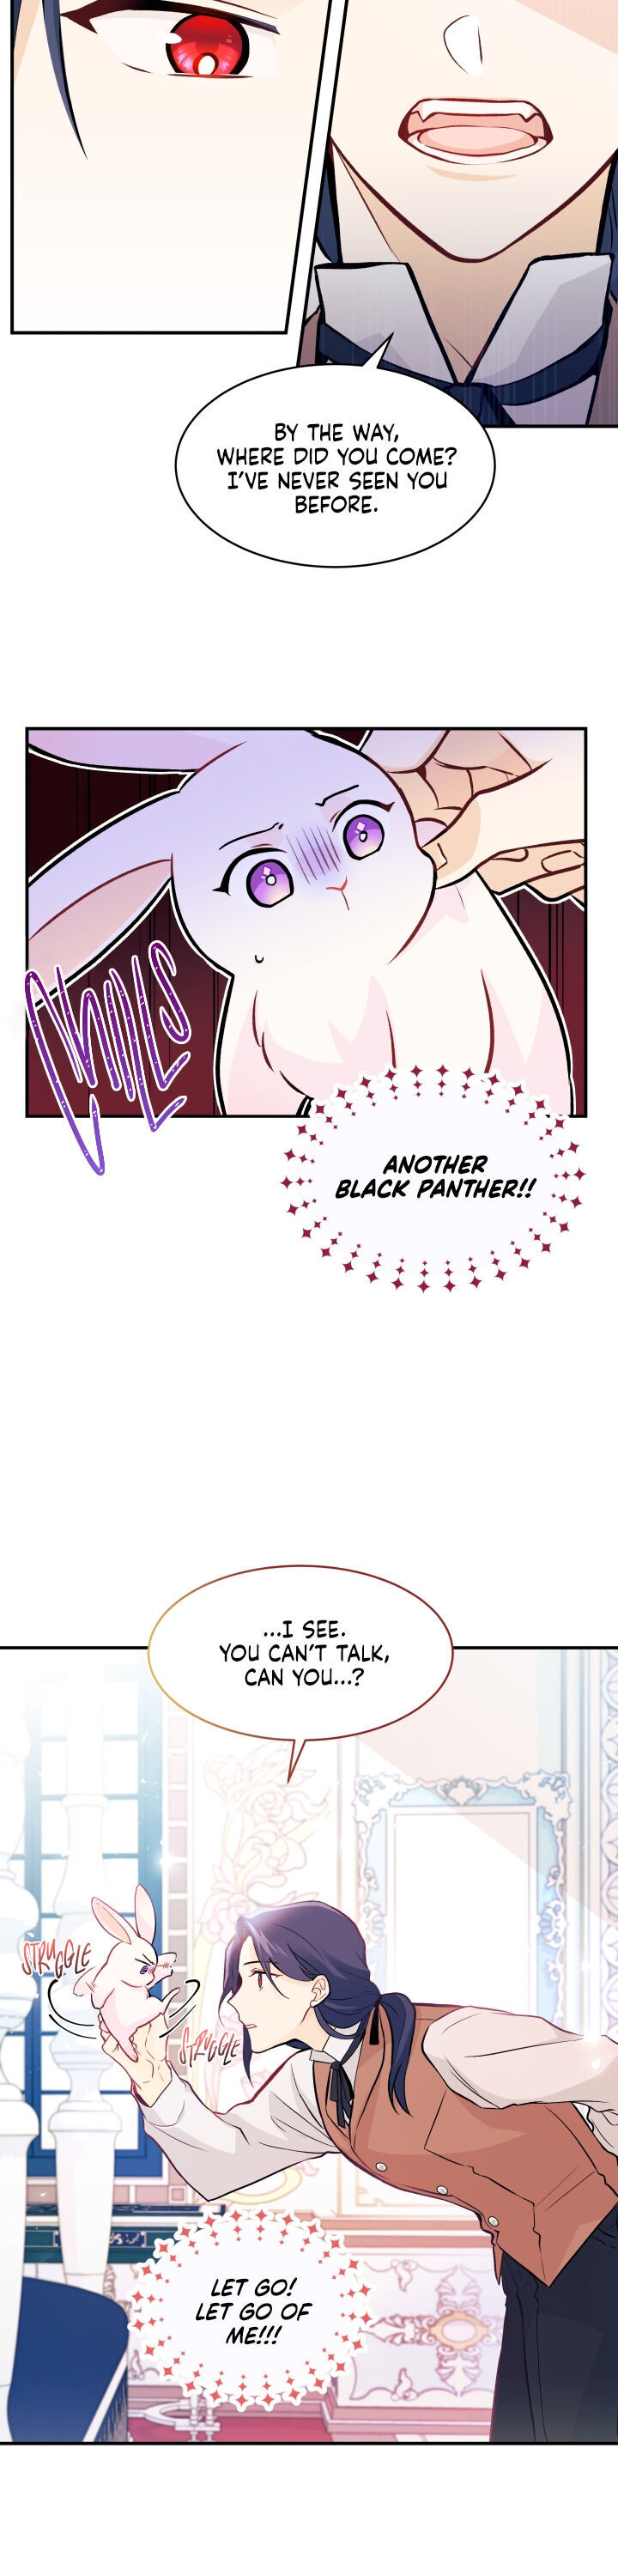 The Symbiotic Relationship Between A Rabbit and A Black Panther - Chapter 2 Page 9